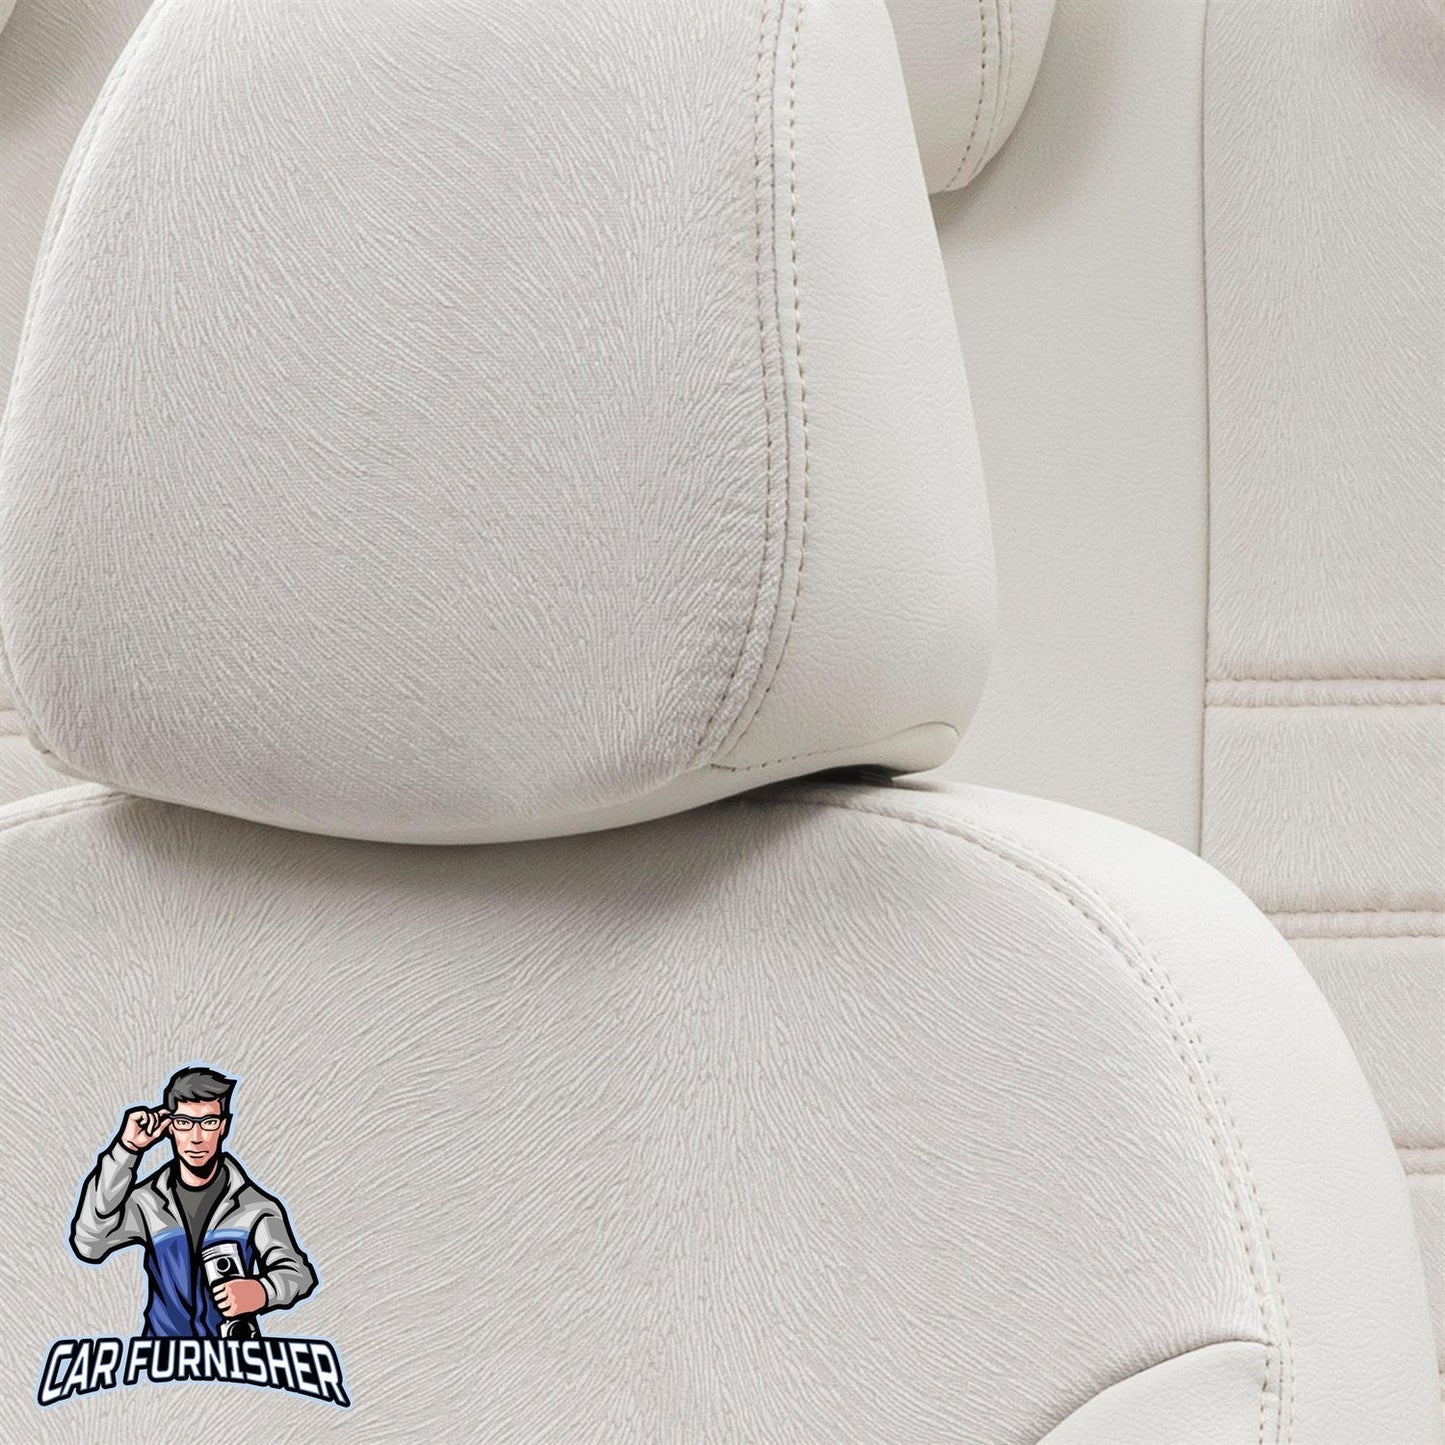 Skoda Scala Seat Covers London Foal Feather Design Ivory Leather & Foal Feather